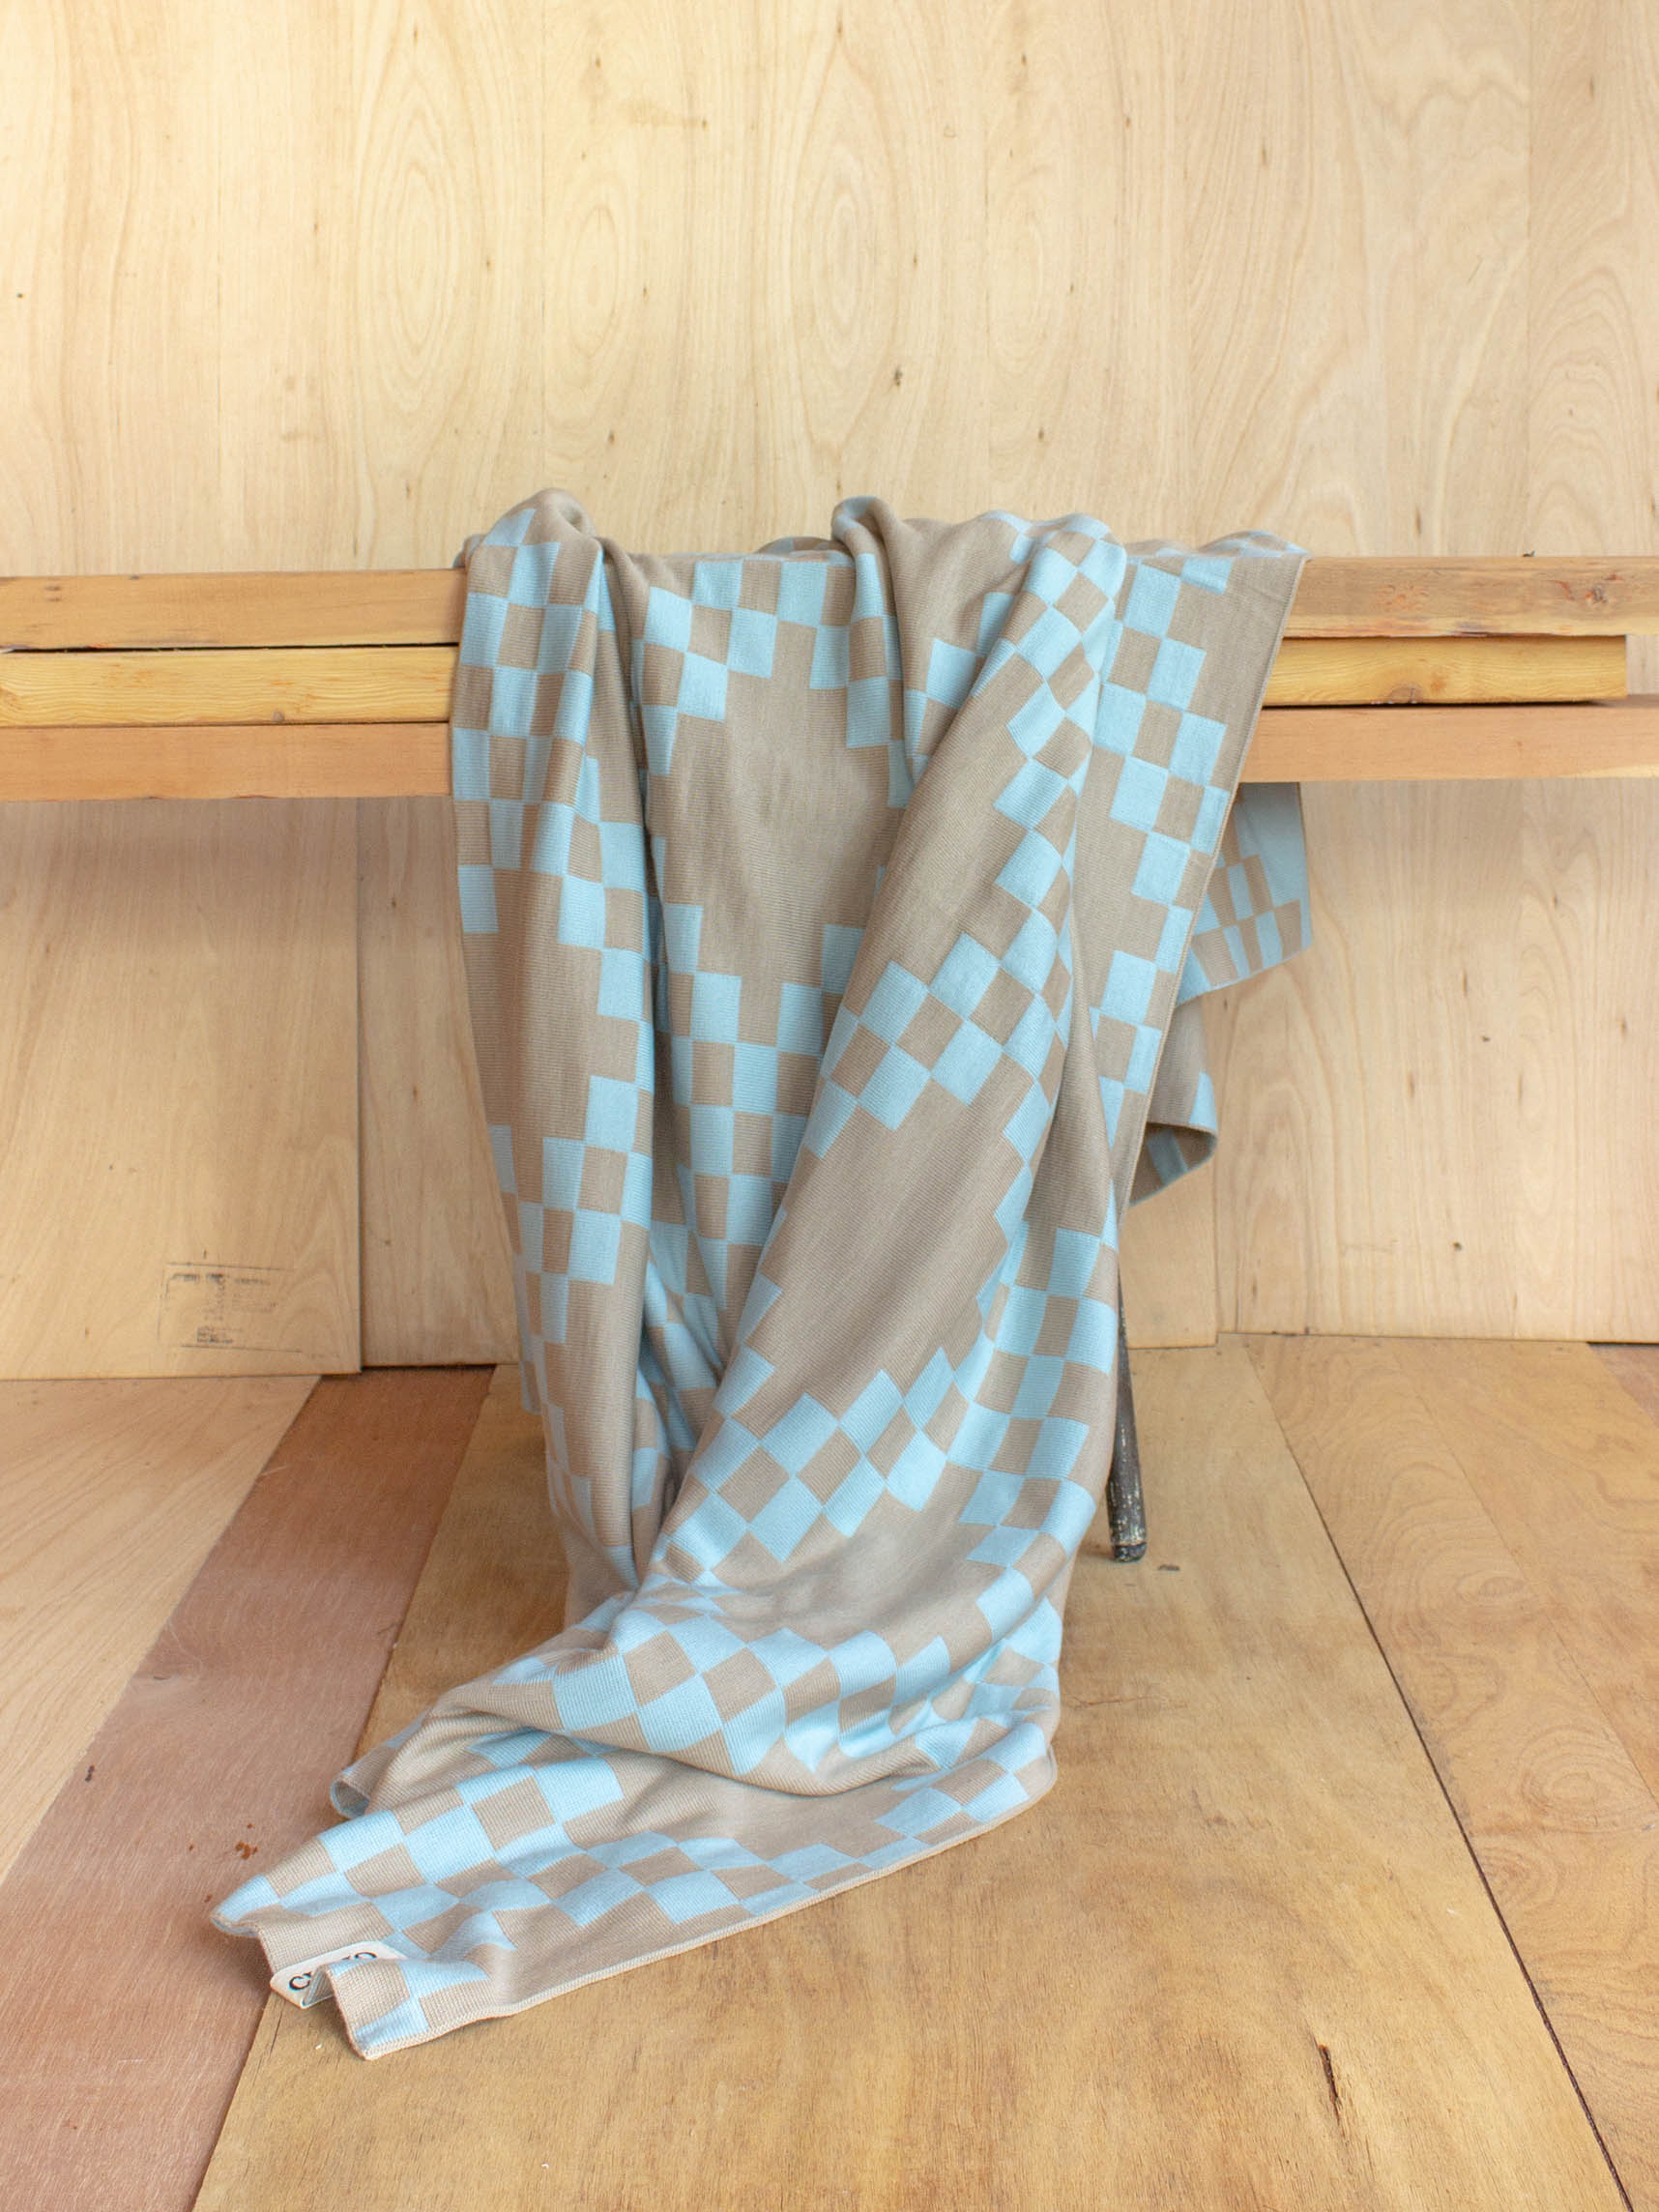 SKY CHAINS Merino Wool Blanket - Light Blue and Mushroom - Available in Baby, Queen, and King Sizes